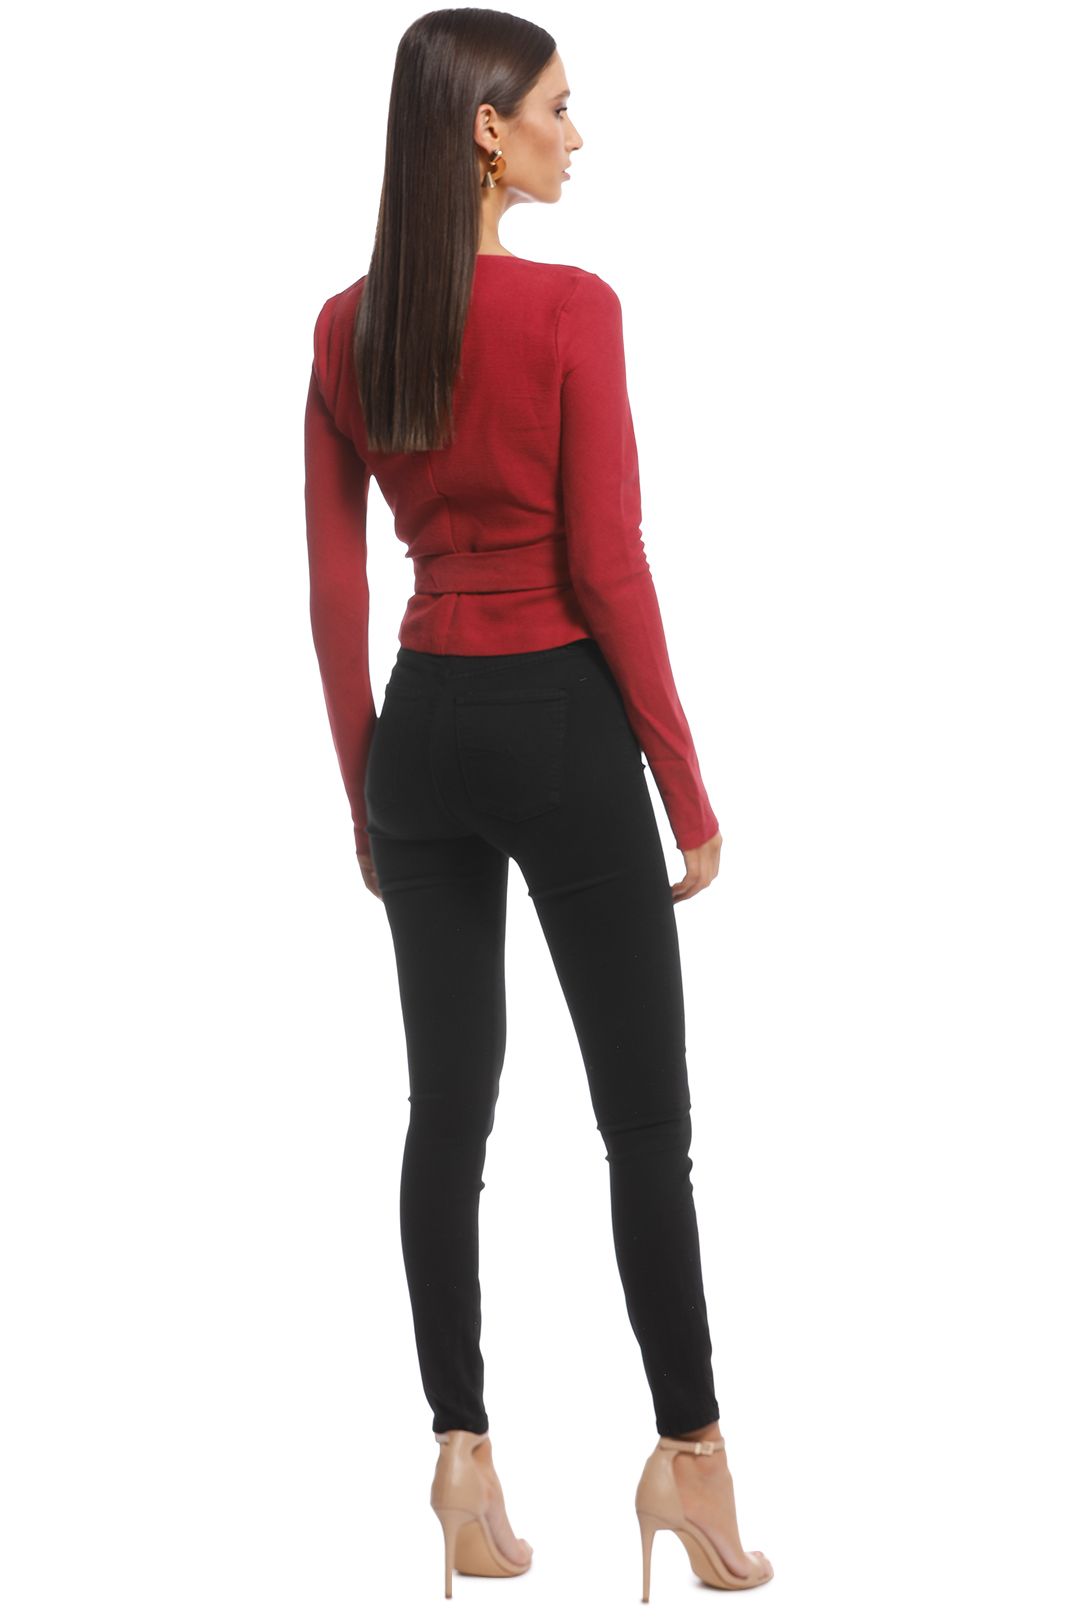 Bec and Bridge - Schiffer Wrap Top - Red - Back